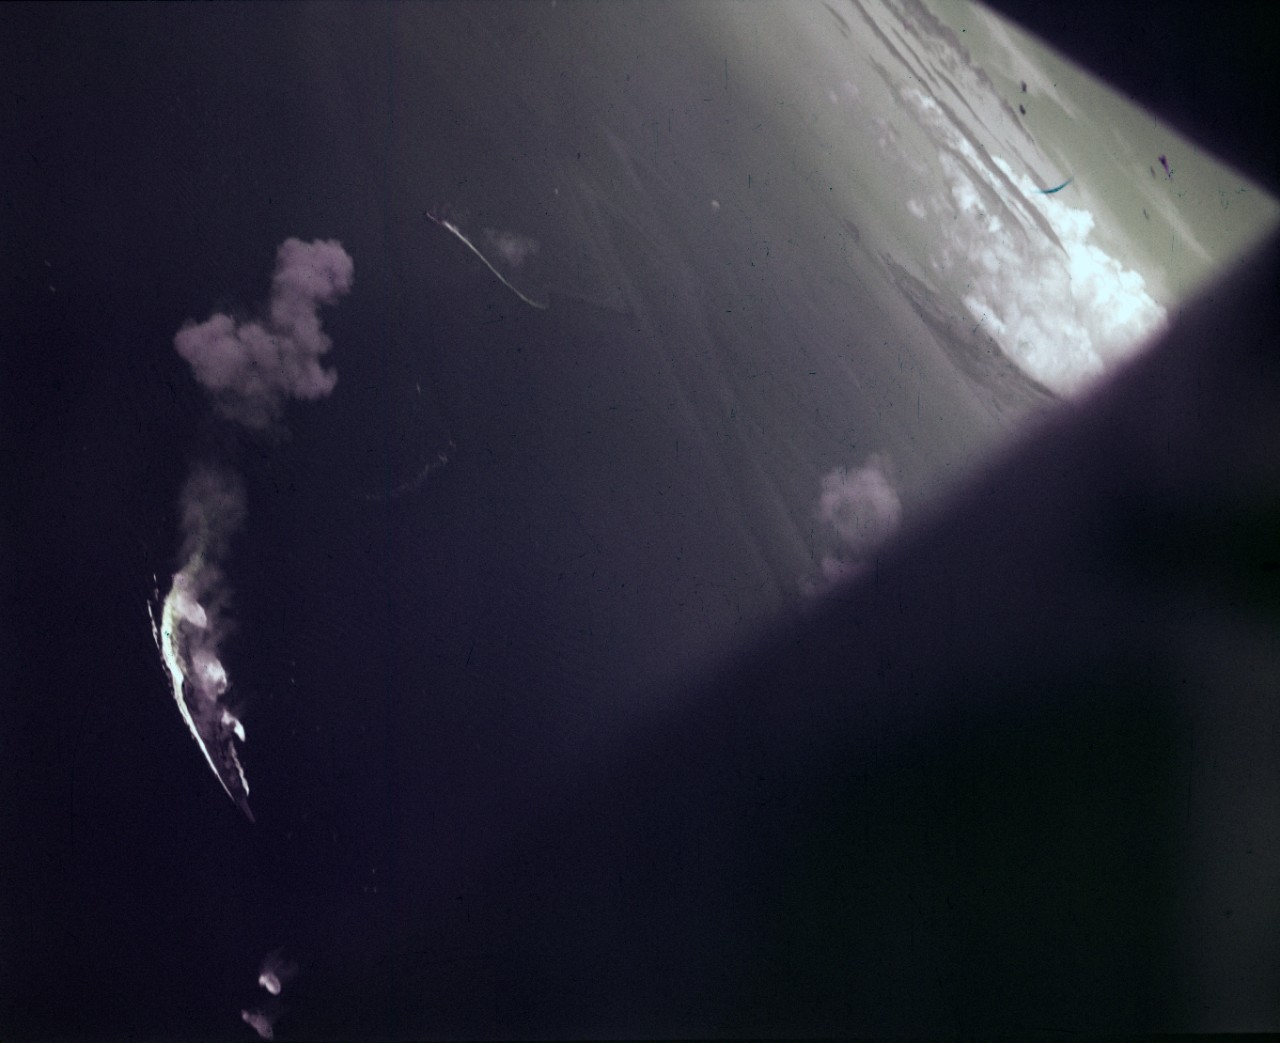 Japanese fleet maneuvering while under attack by U.S. Navy aircraft during the Battle of the Sibuyan Sea, 24 October 1944. Ship at bottom center is a Yamato class battleship, with bombs falling nearby. Photographed by Richard Shipman, a photographer from USS Intrepid (CV-11), from the back seat of an SB2C.